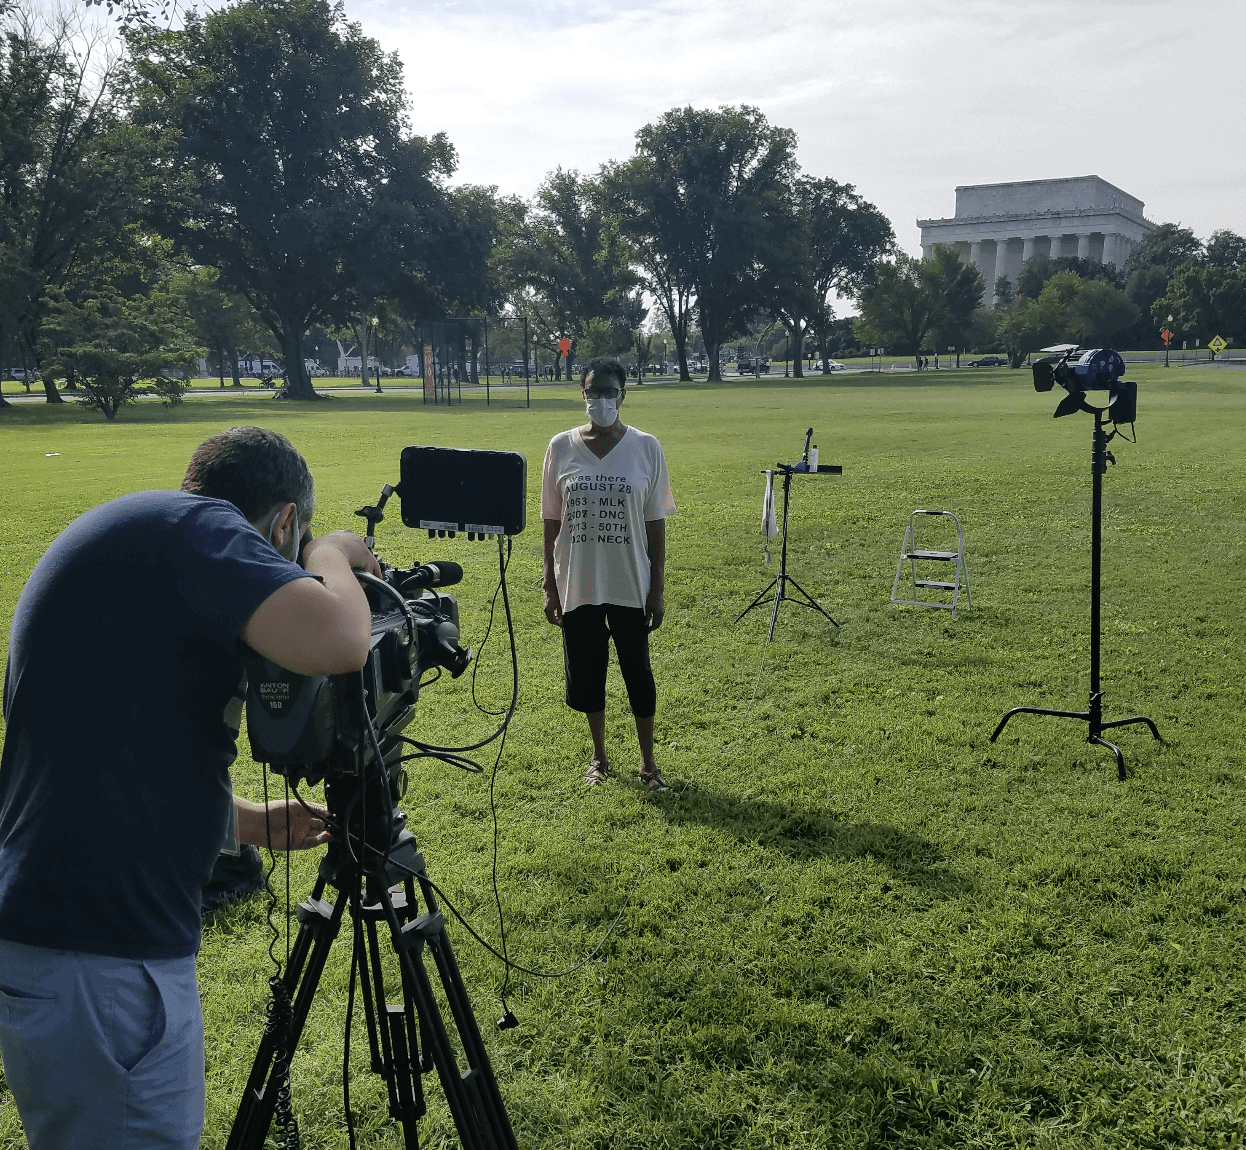 Jacqueline Galloway Blake interviewed by news media about the August 28, 2020, March on Washington. [Photo: courtesy of Jacqueline Galloway Blake]